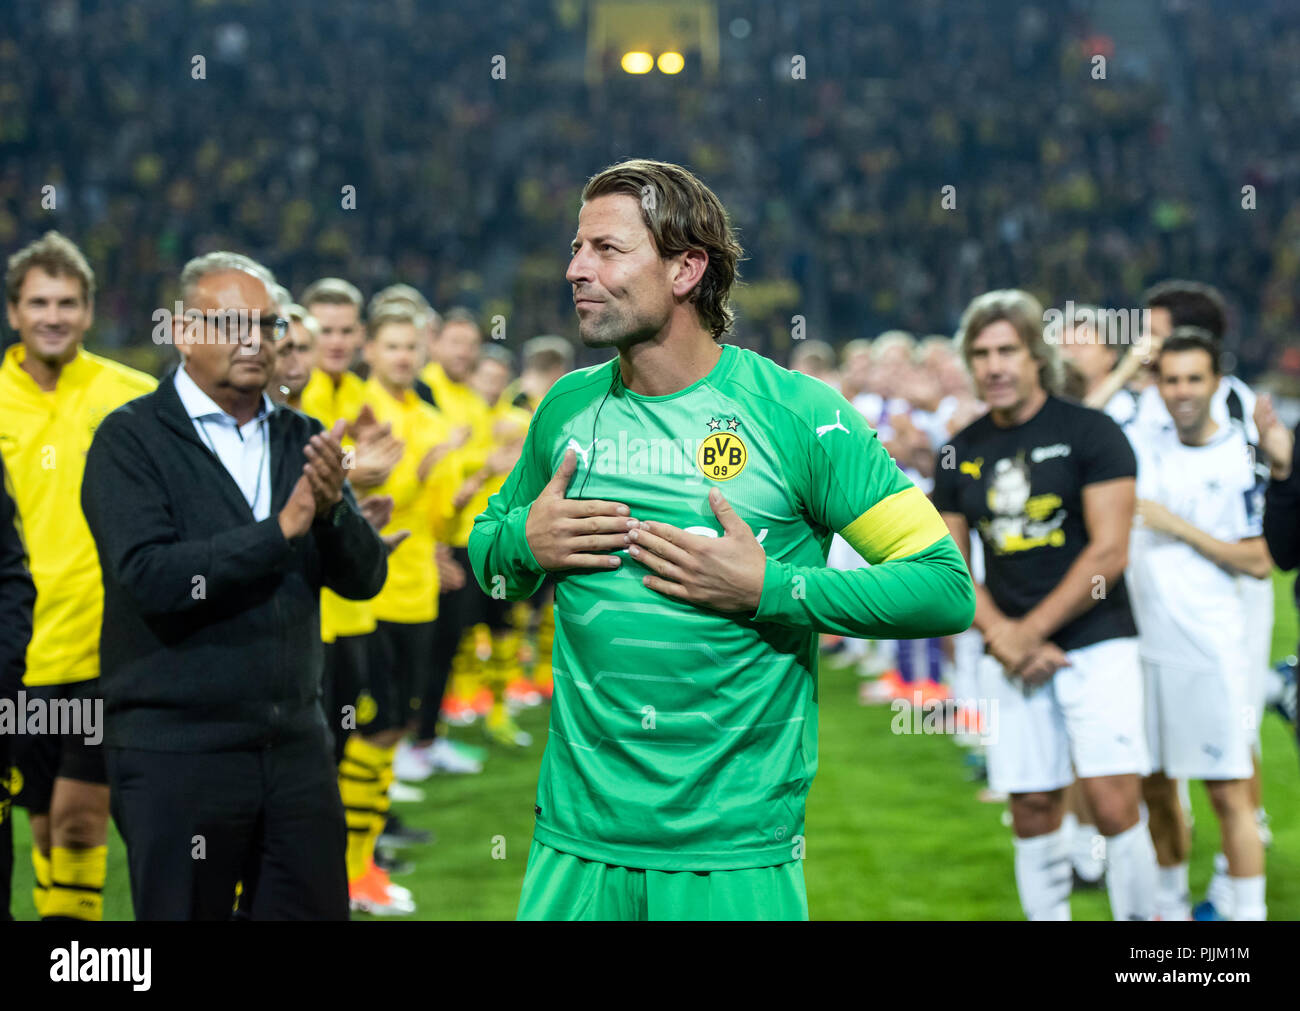 Dortmund, Germany. 07th Sep, 2018. Roman Weidenfeller's farewell match: Goalkeeper Roman Weidenfeller is celebrated by his team-mates after the game. Credit: Bernd Thissen/dpa/Alamy Live News Stock Photo